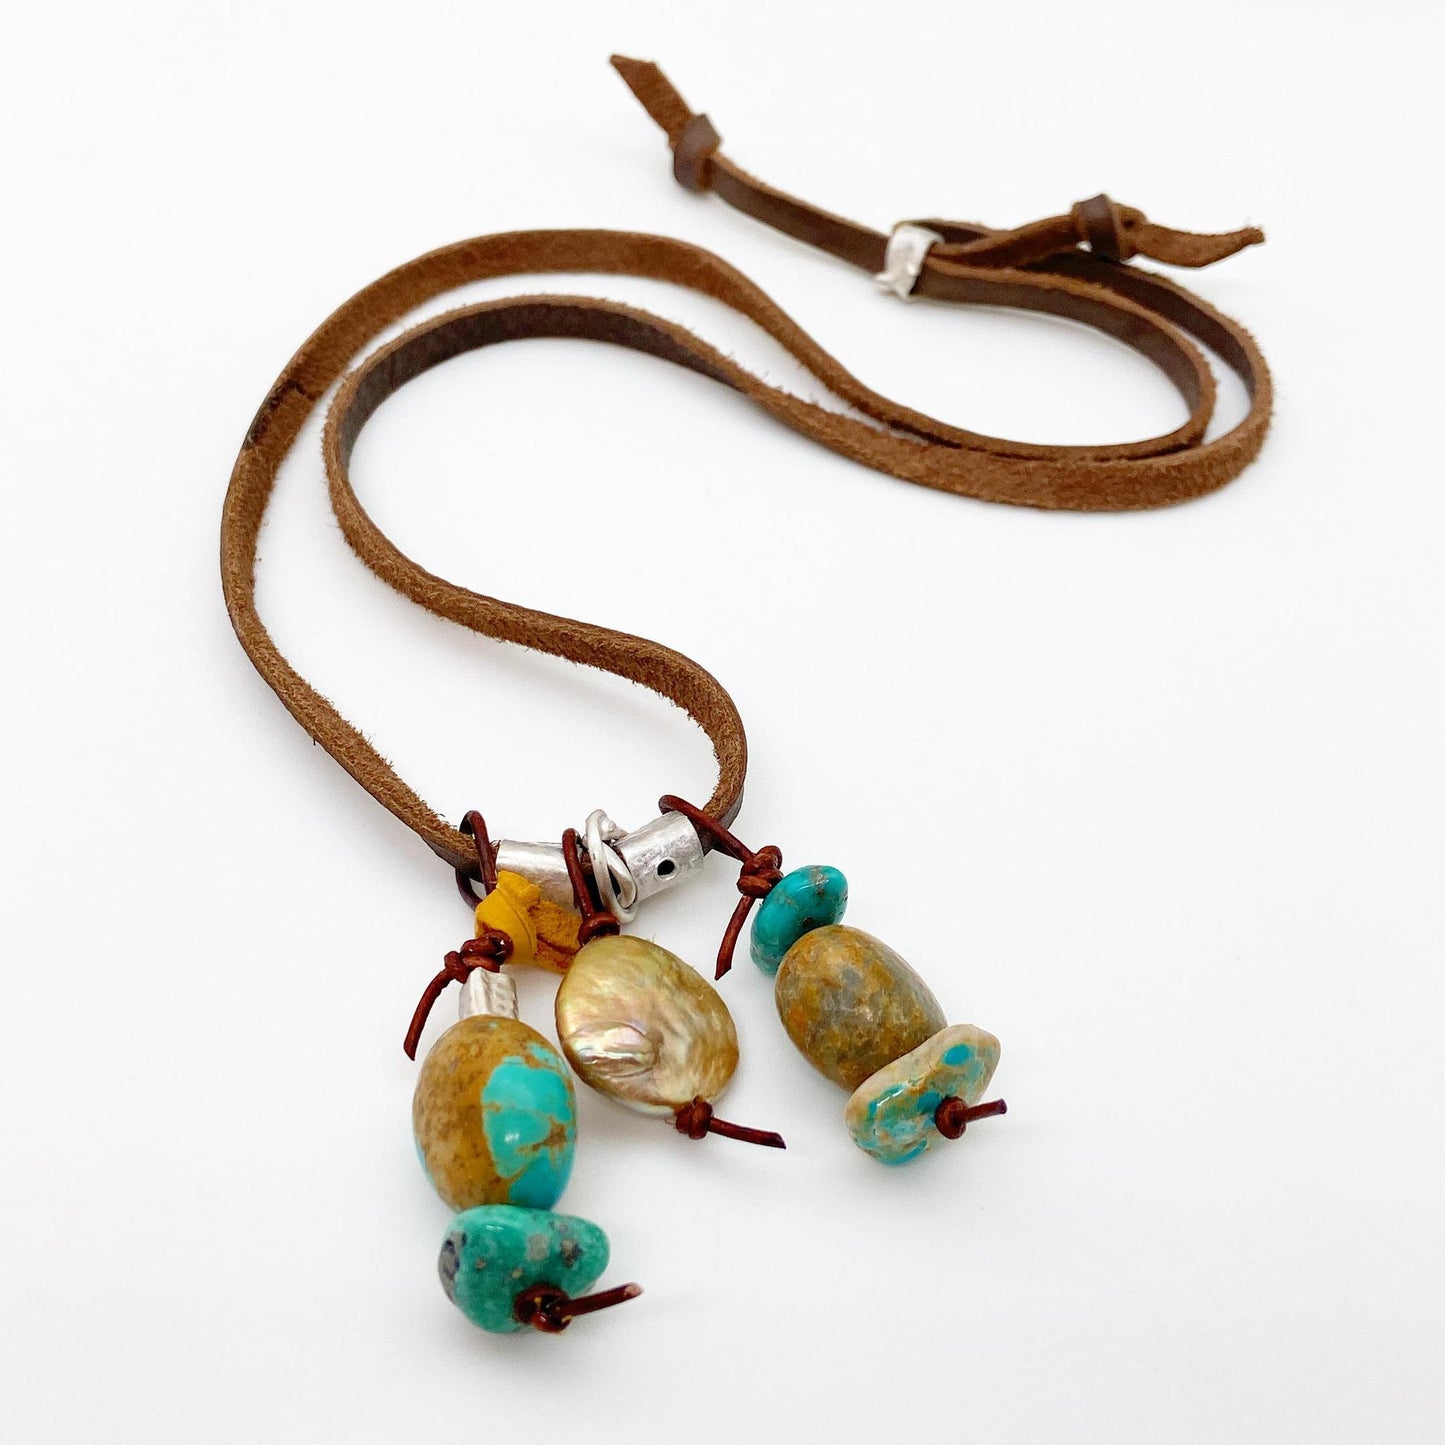 Necklace - Leather/Pearl/Sterling/Turquoise